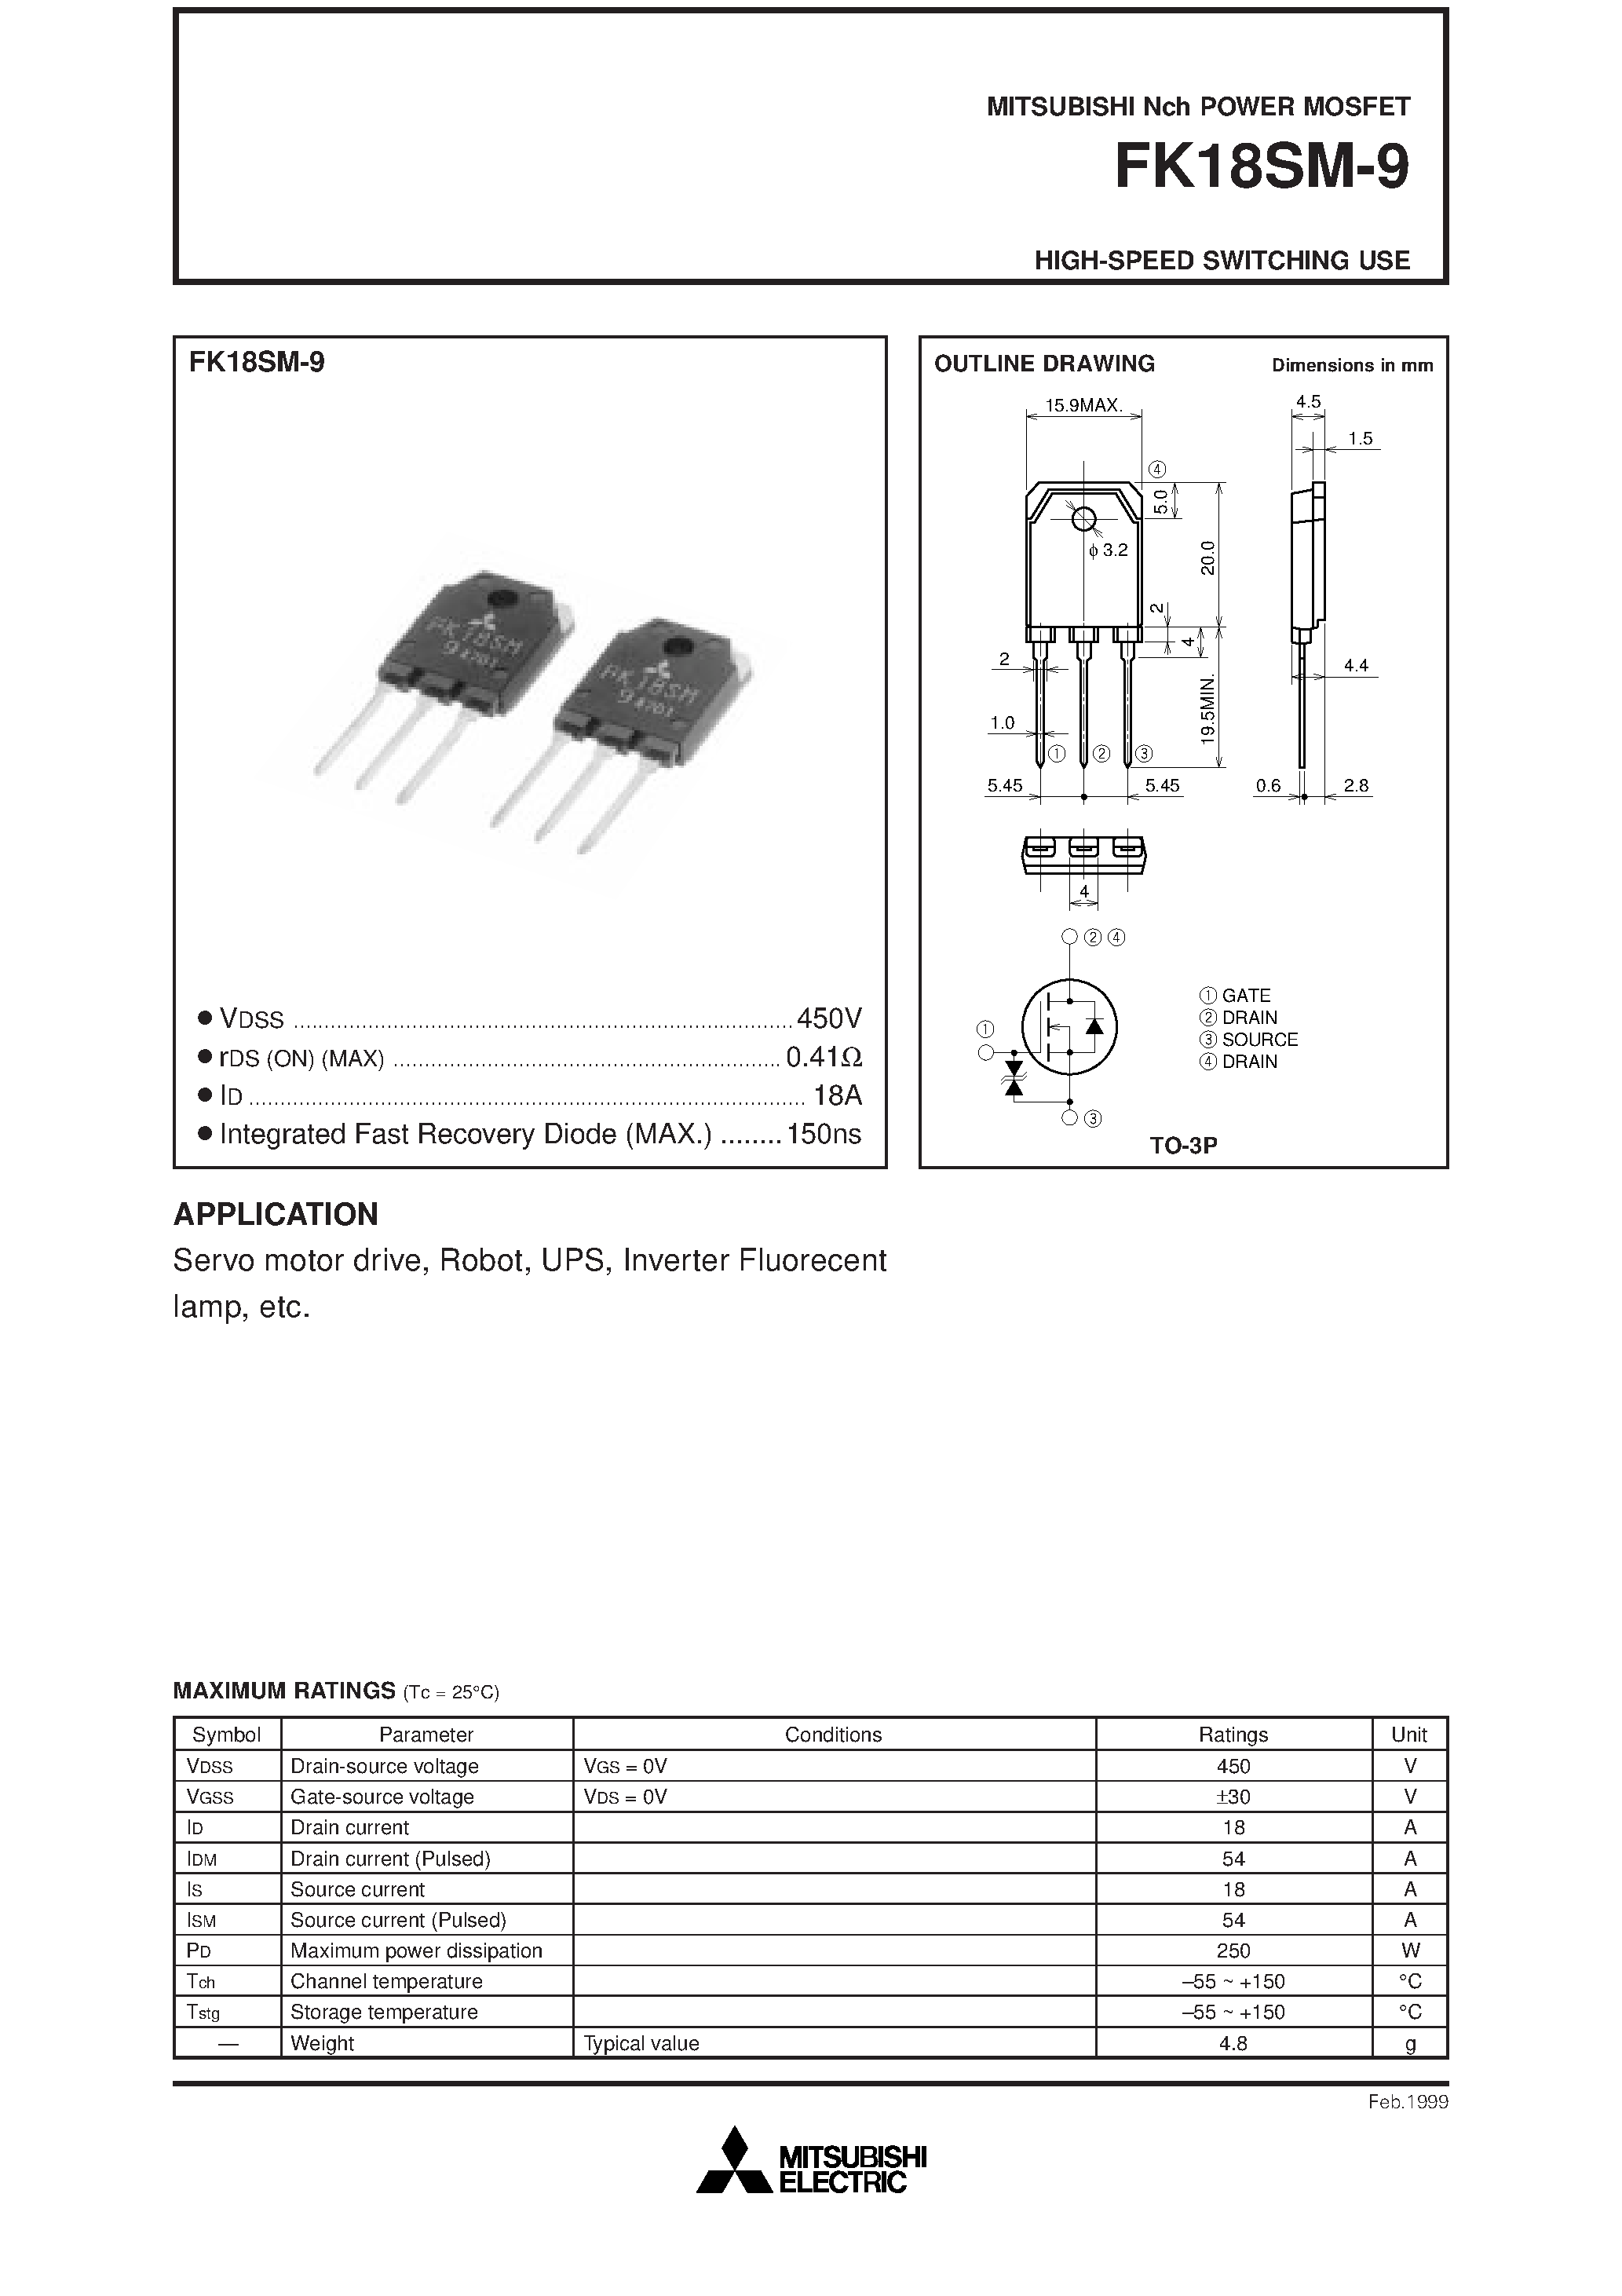 Datasheet FK18SM-9 - Nch POWER MOSFET HIGH-SPEED SWITCHING USE page 1